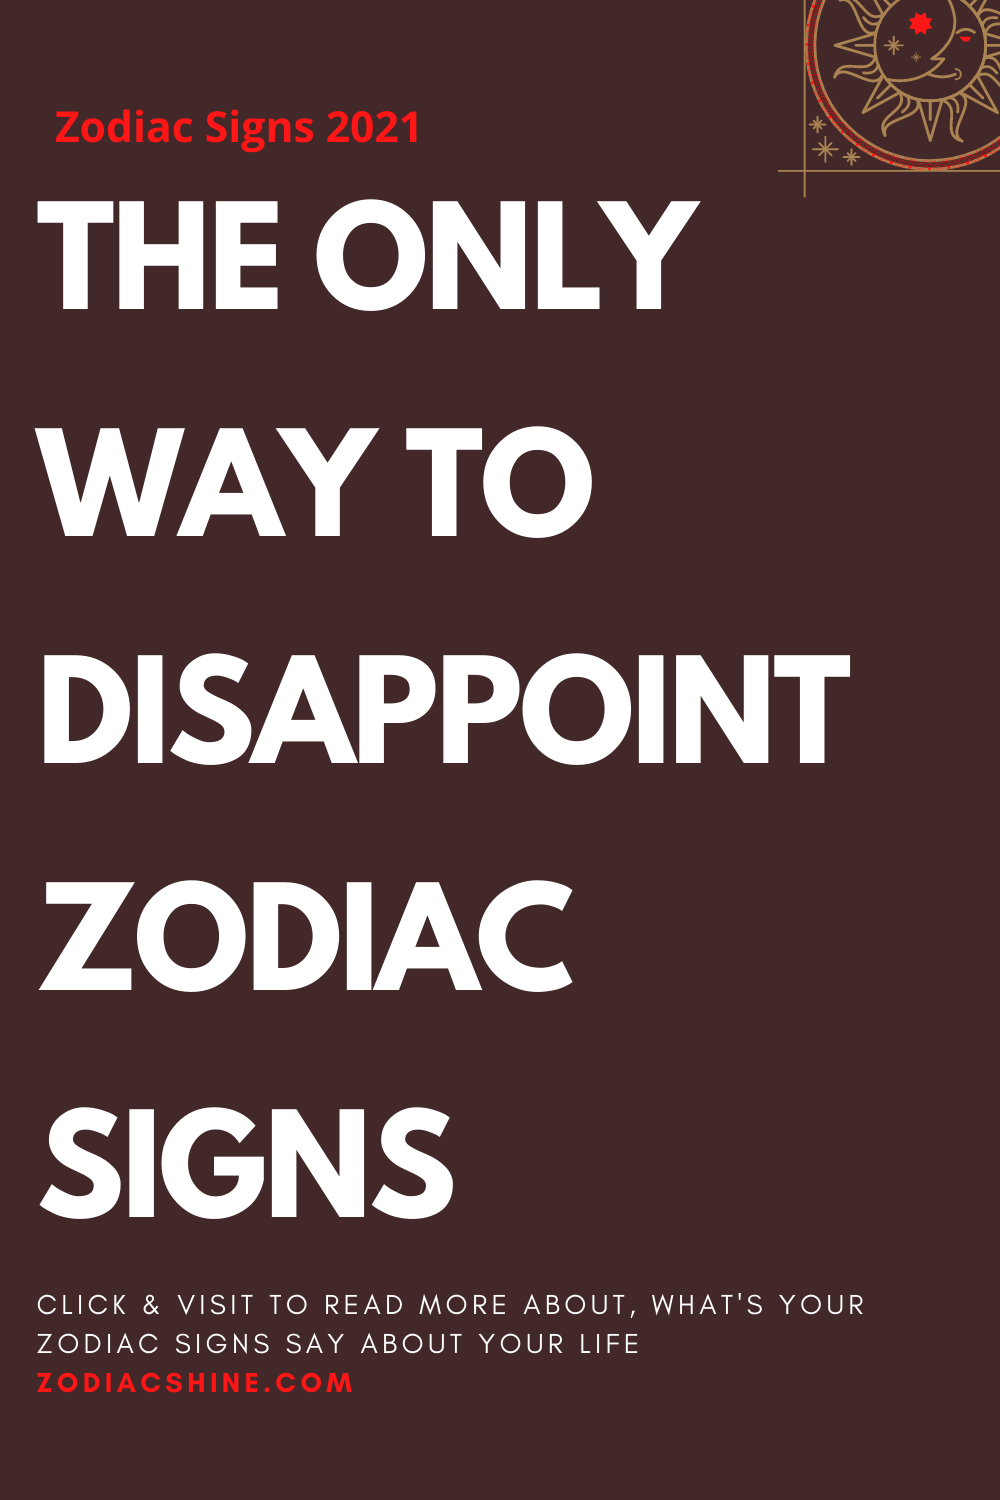 THE ONLY WAY TO DISAPPOINT ZODIAC SIGNS